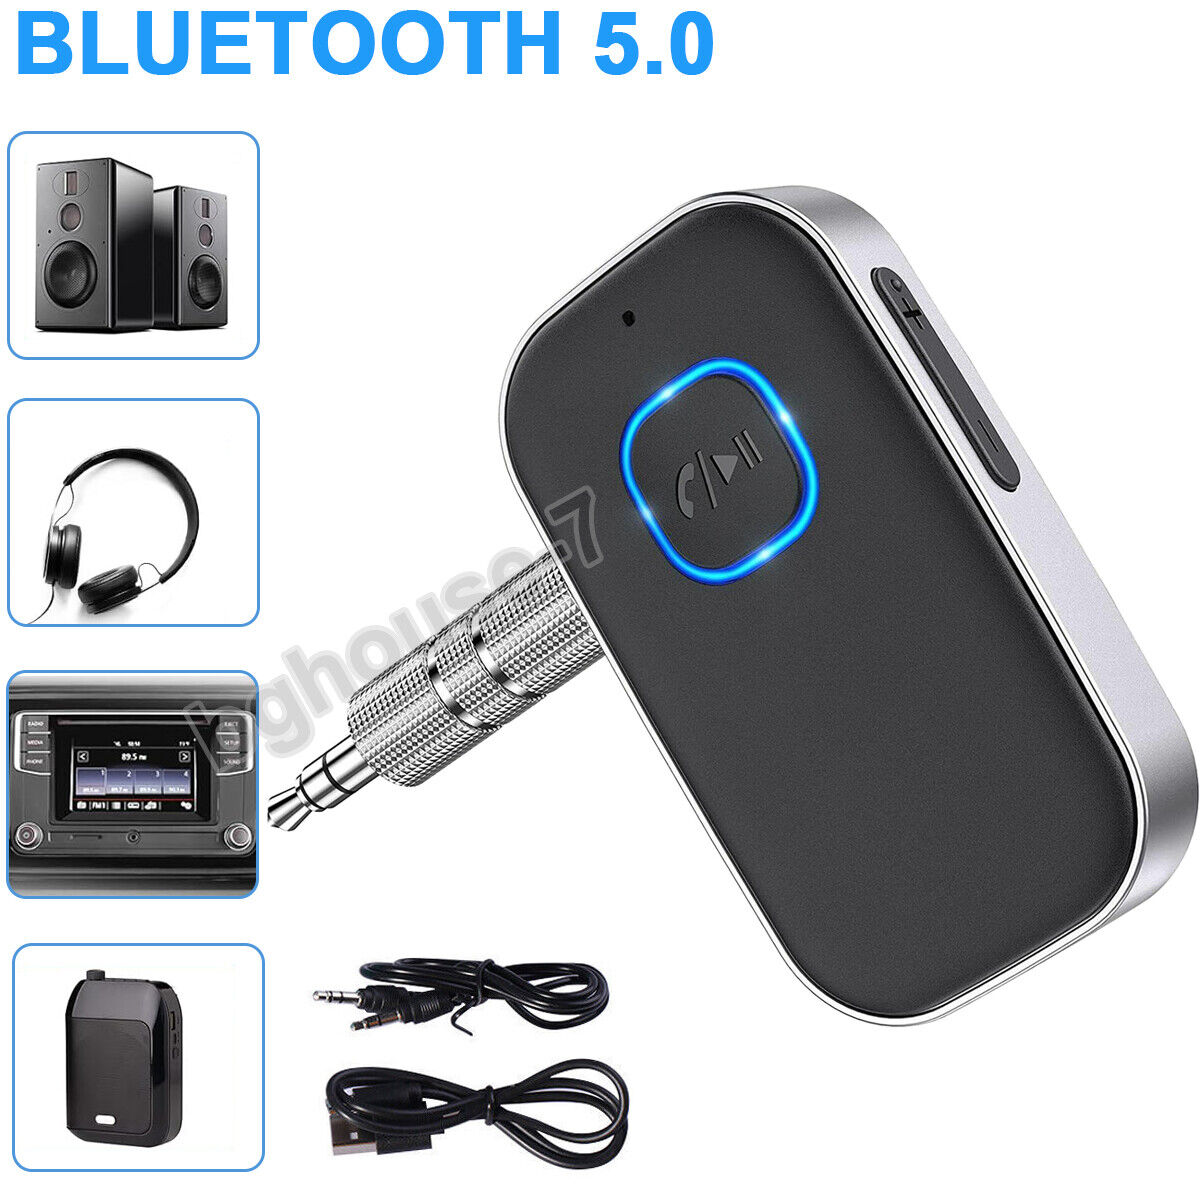 USB Wireless Bluetooth 5.0 Audio Receiver 3.5mm Aux Adapter for Car Headphone PC